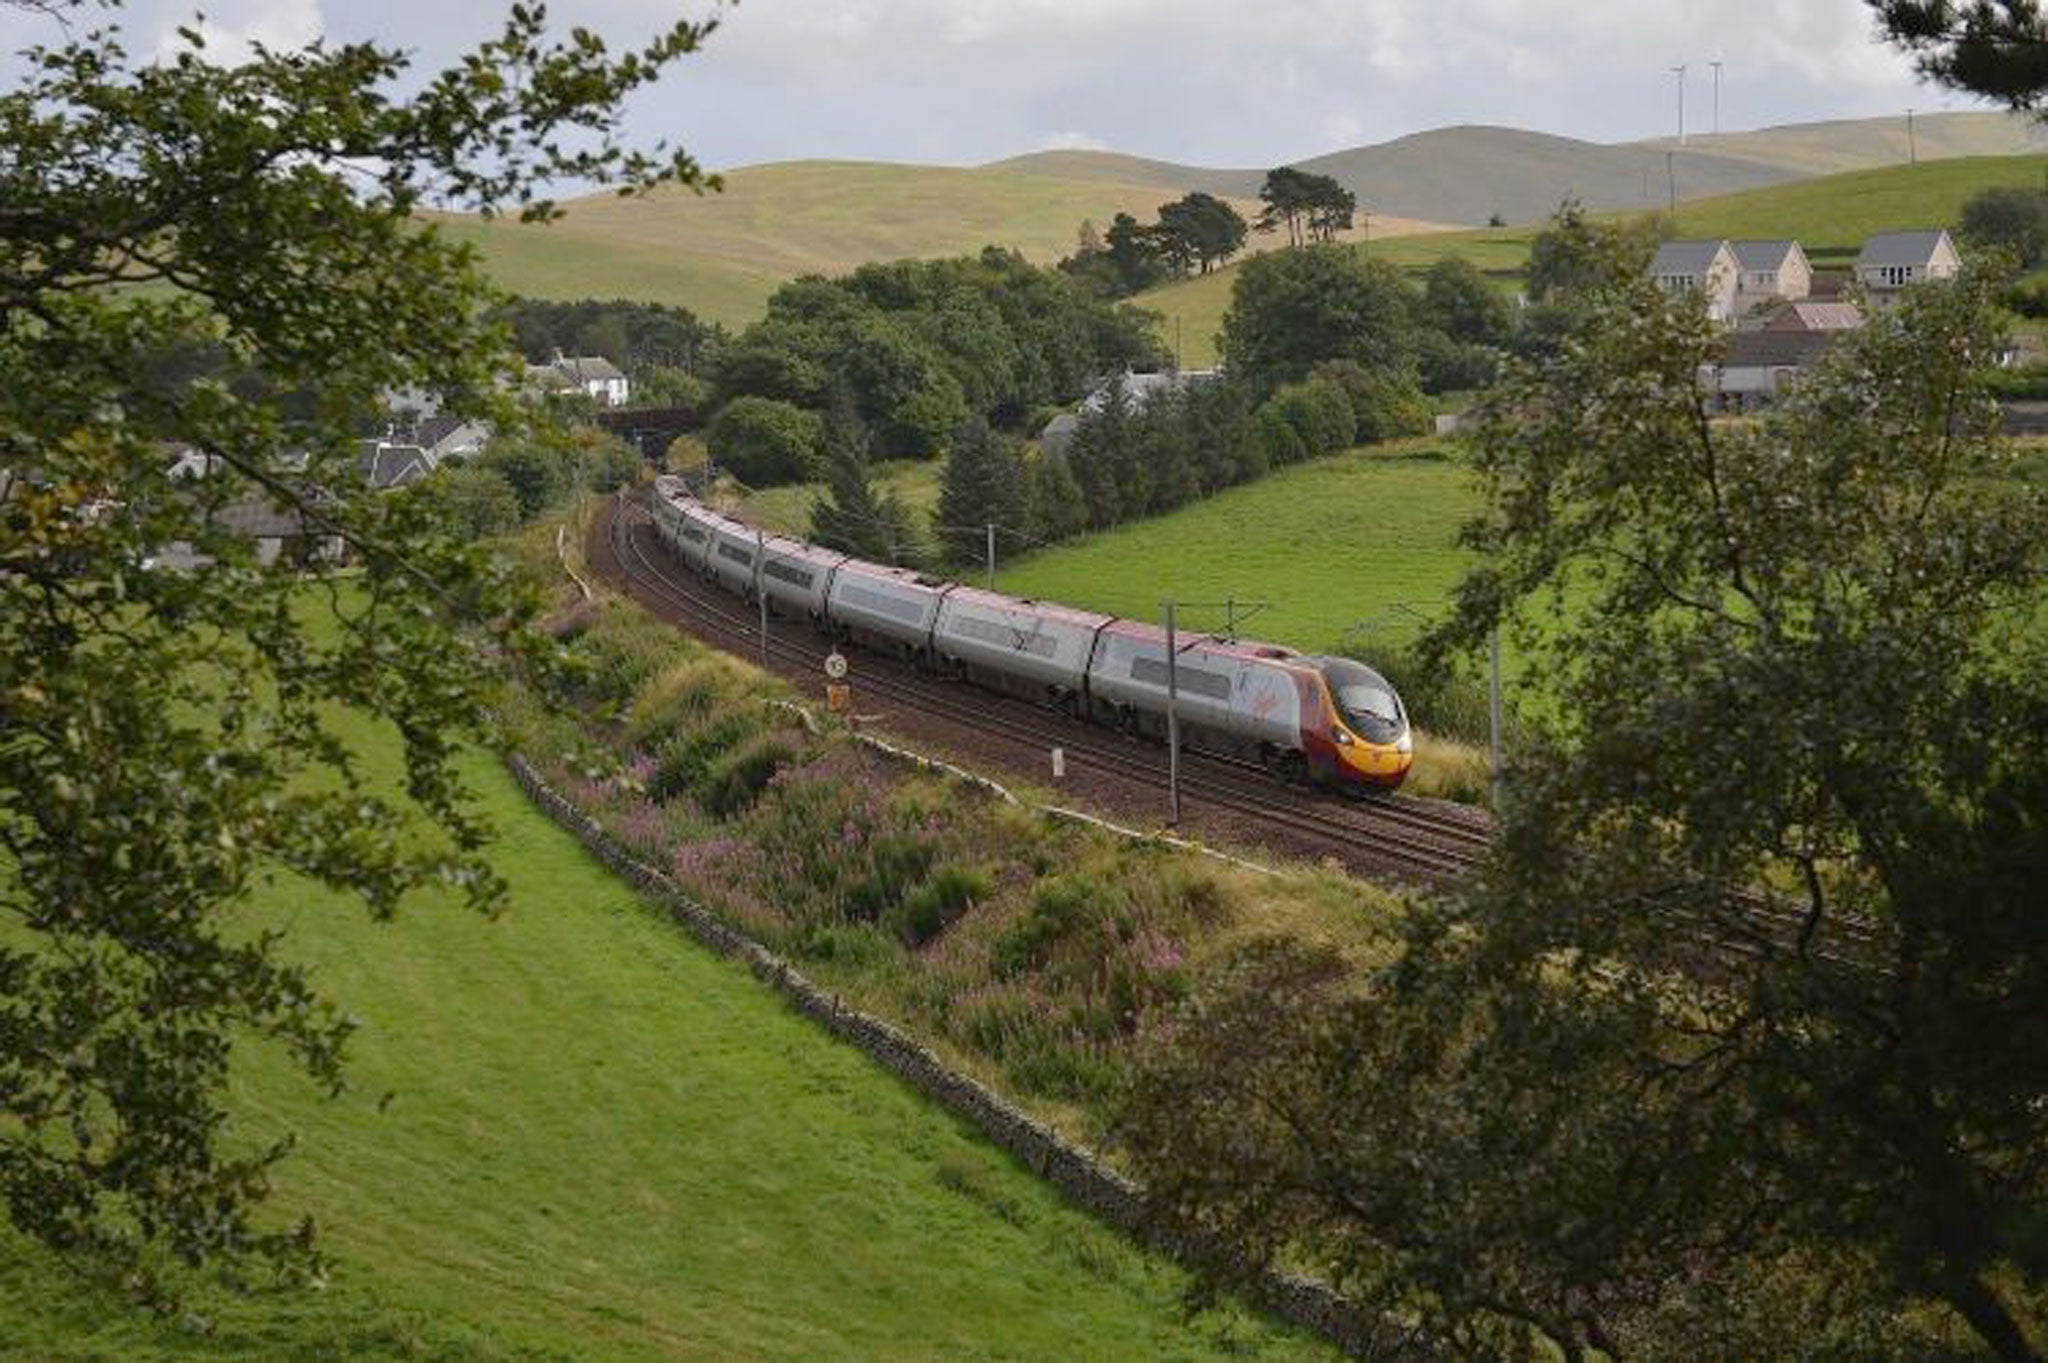 Advance bookings direct with rail companies offers huge savings